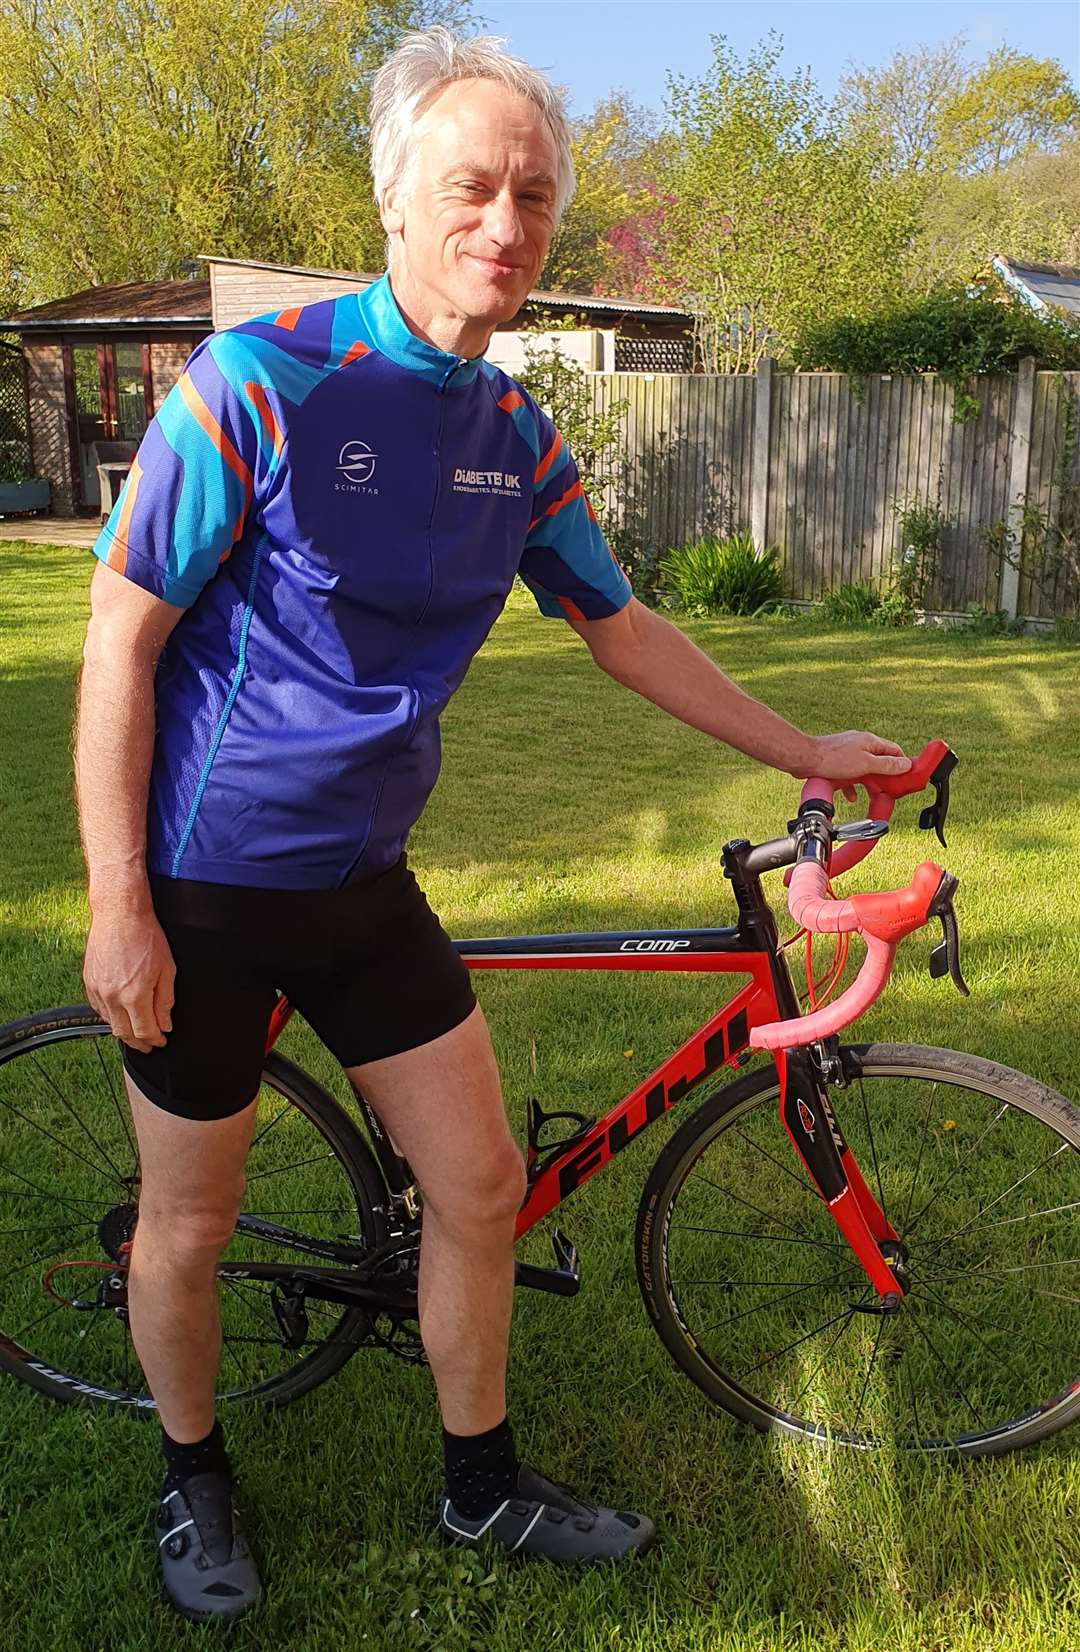 Karl Royer is taking part in a charity cycle ride to raise money for Diabetes UK.